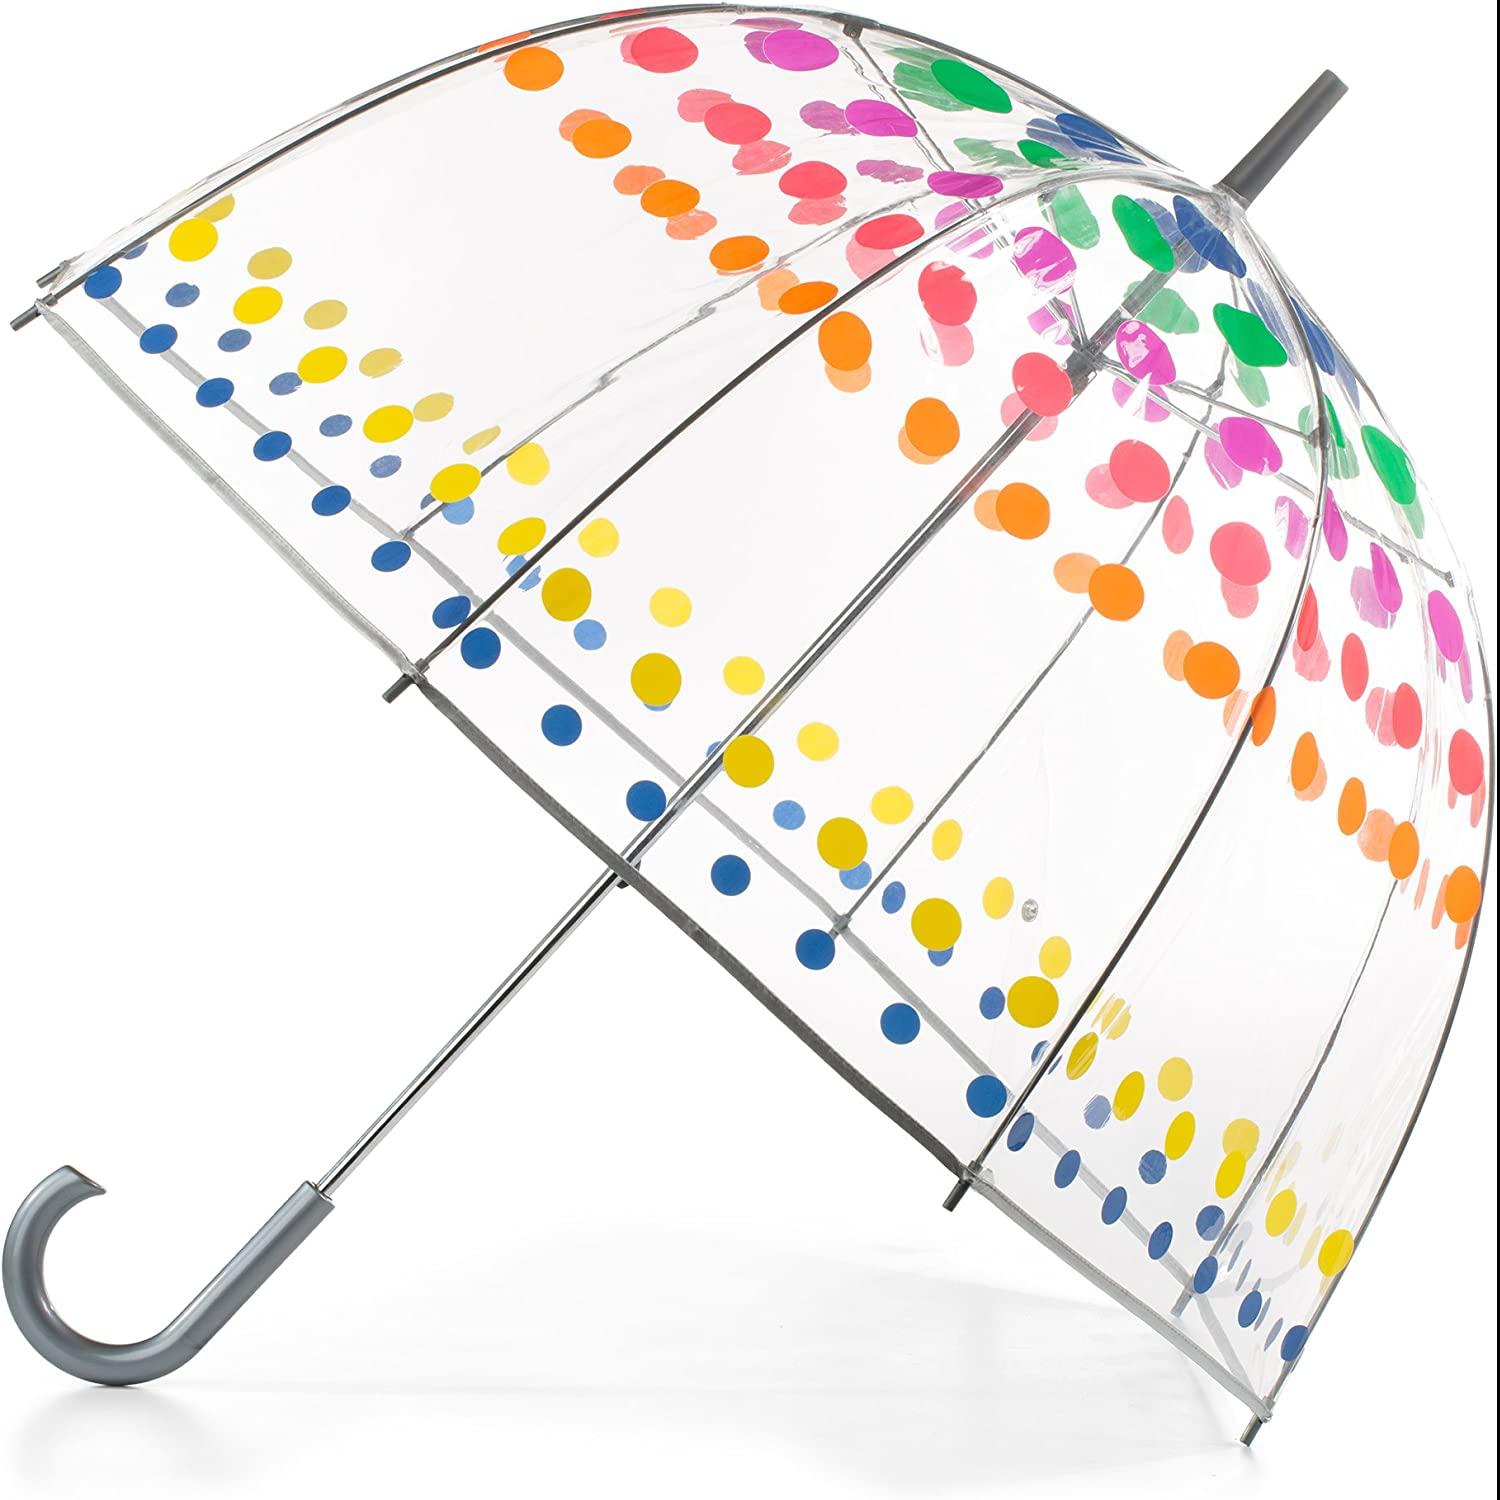 Totes Womens Clear or Dots Bubble Umbrella for $12.32